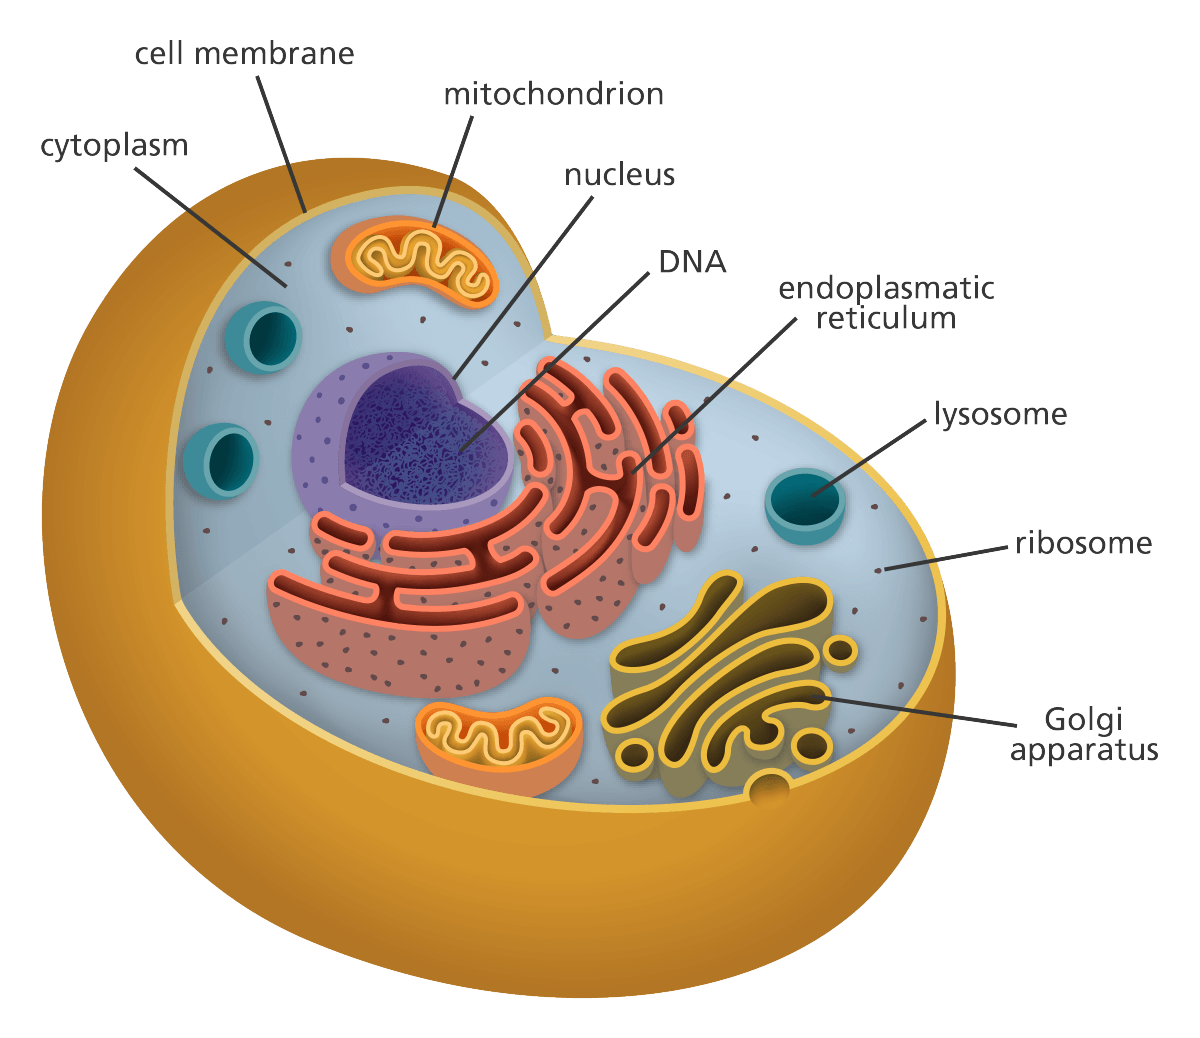 Review Cells and Organelles